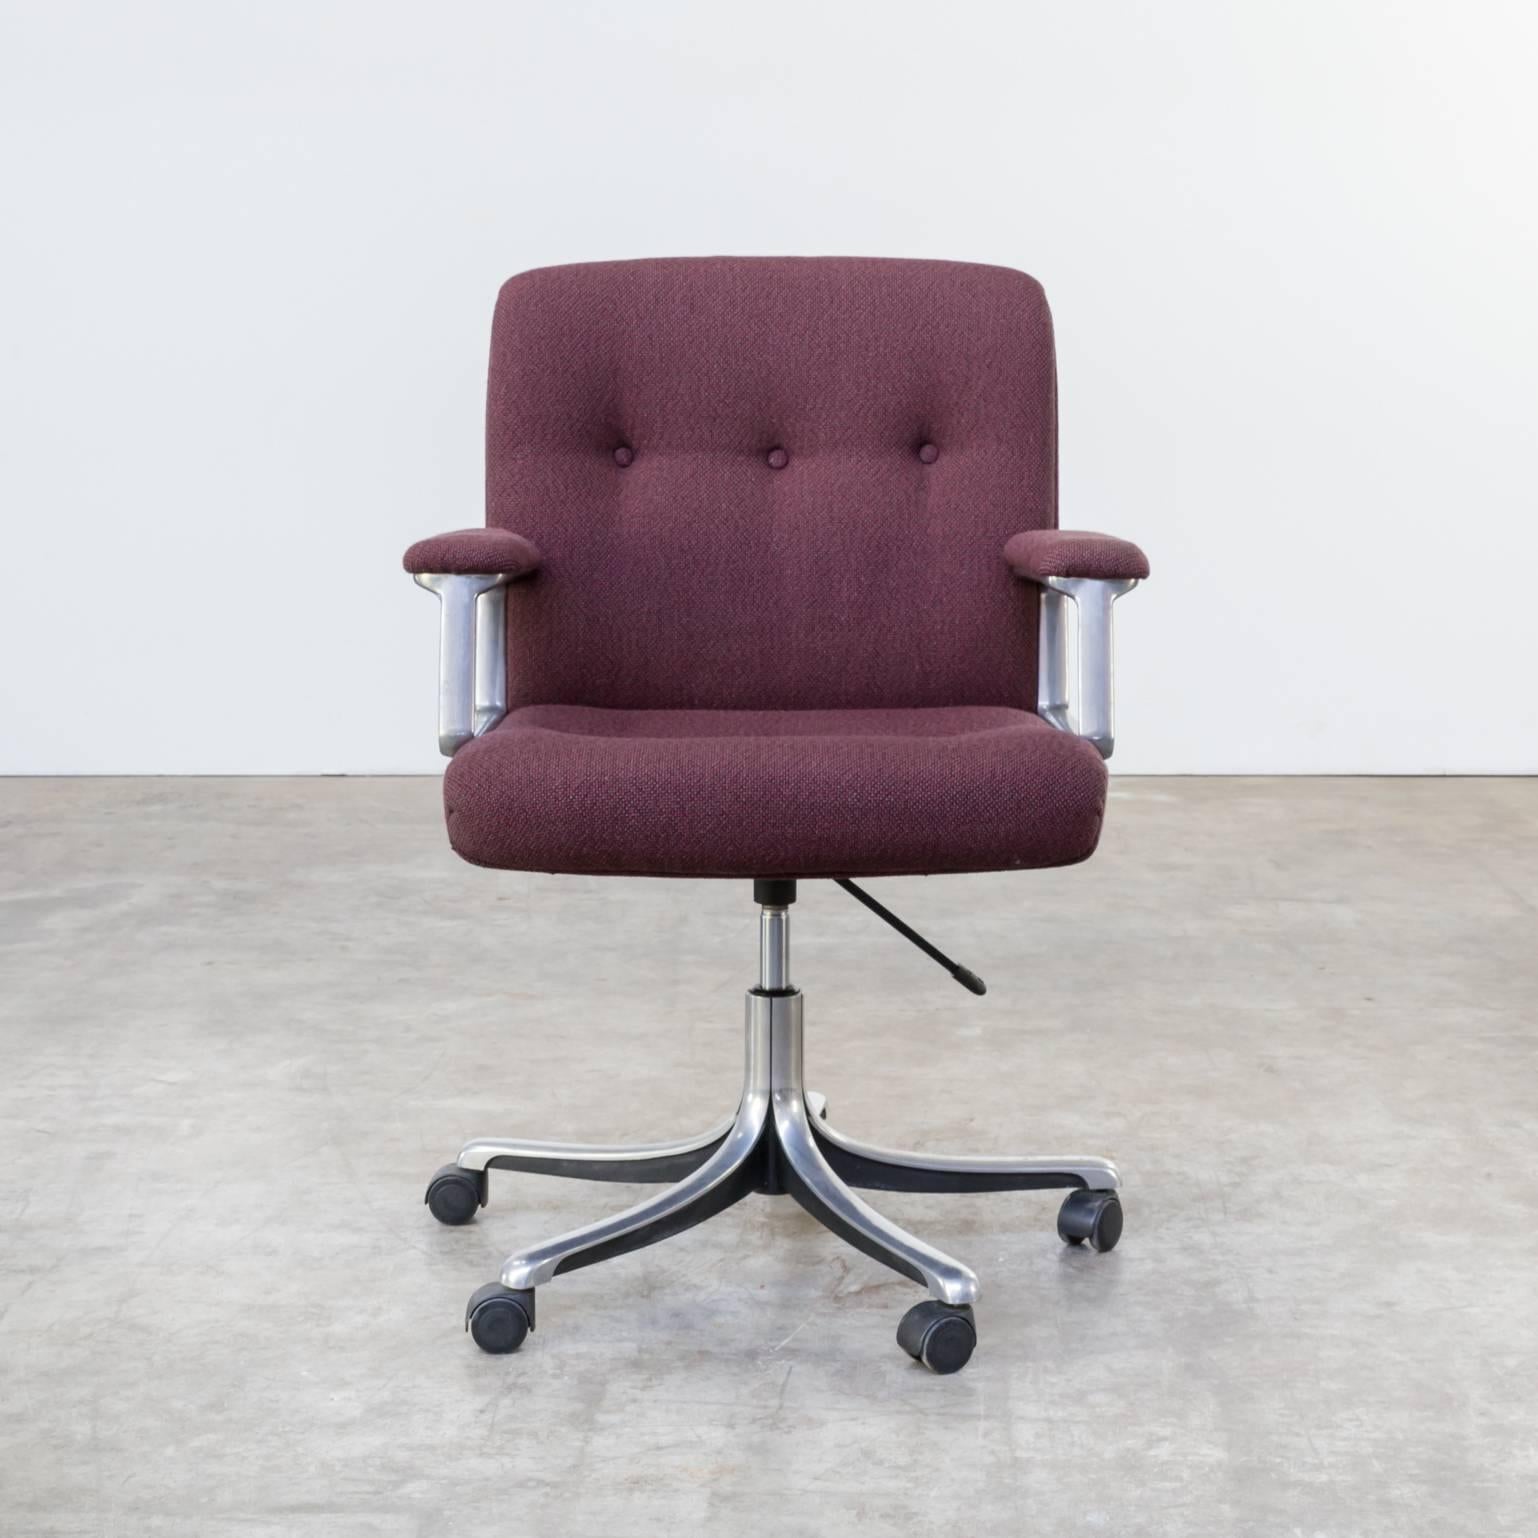 The P128 desk chair was designed by Osvaldo Borsani during the 1960s for Tecno. It features a base with five wheels and has a working pneumatic spring.
 